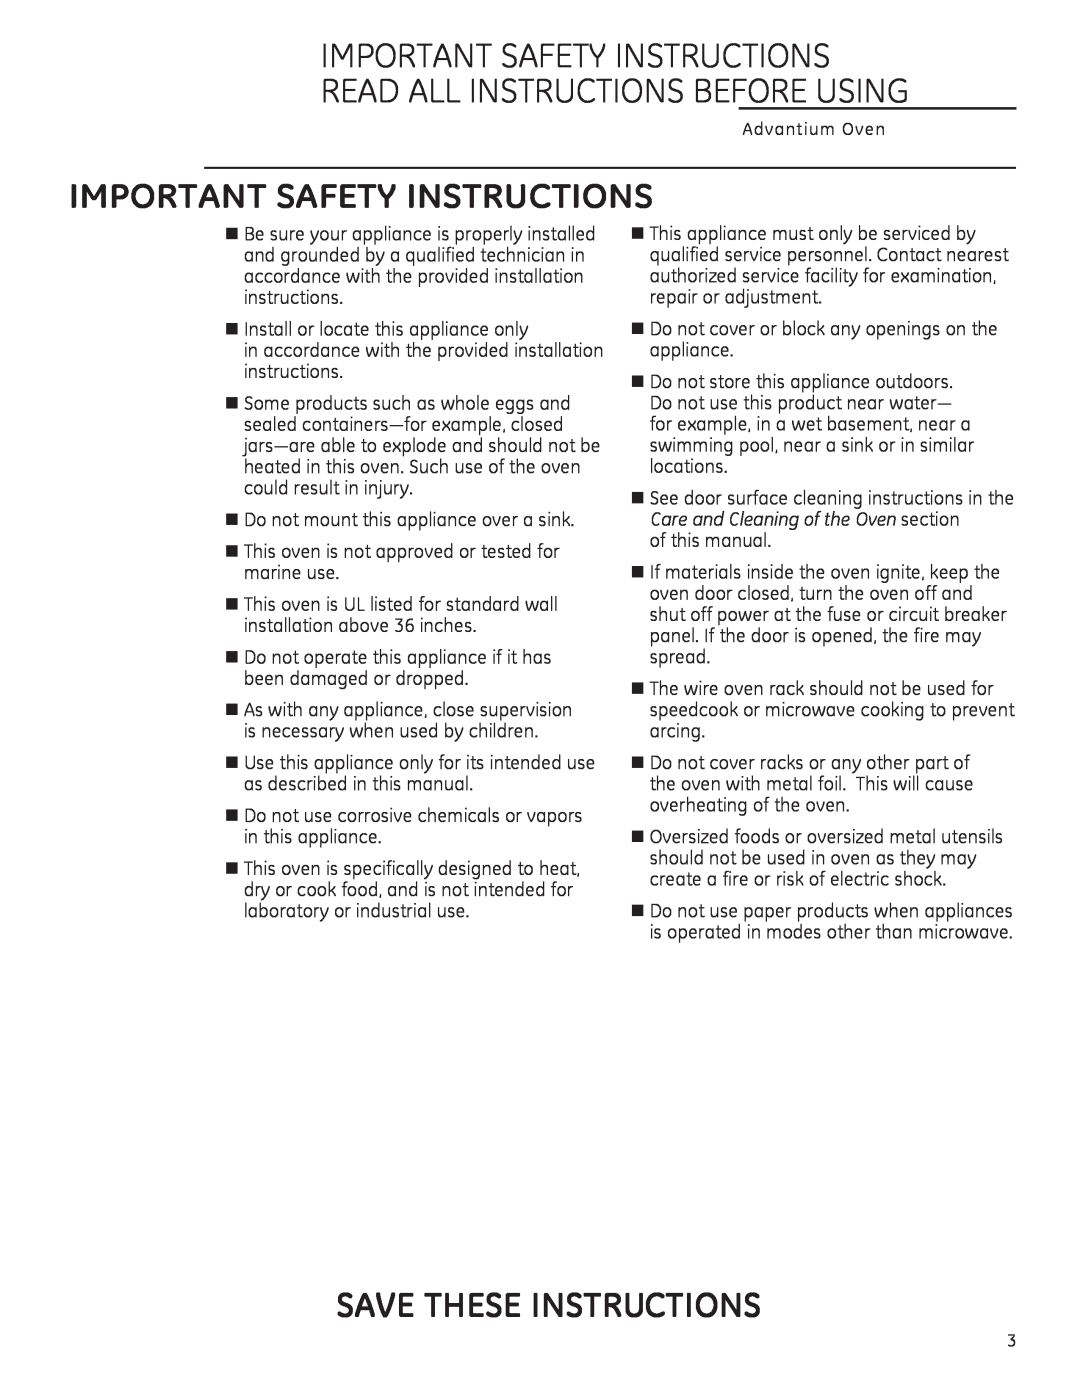 GE PSA1200, PSA1201, CSA1201 Important Safety Instructions, Read All Instructions Before Using, Save These Instructions 